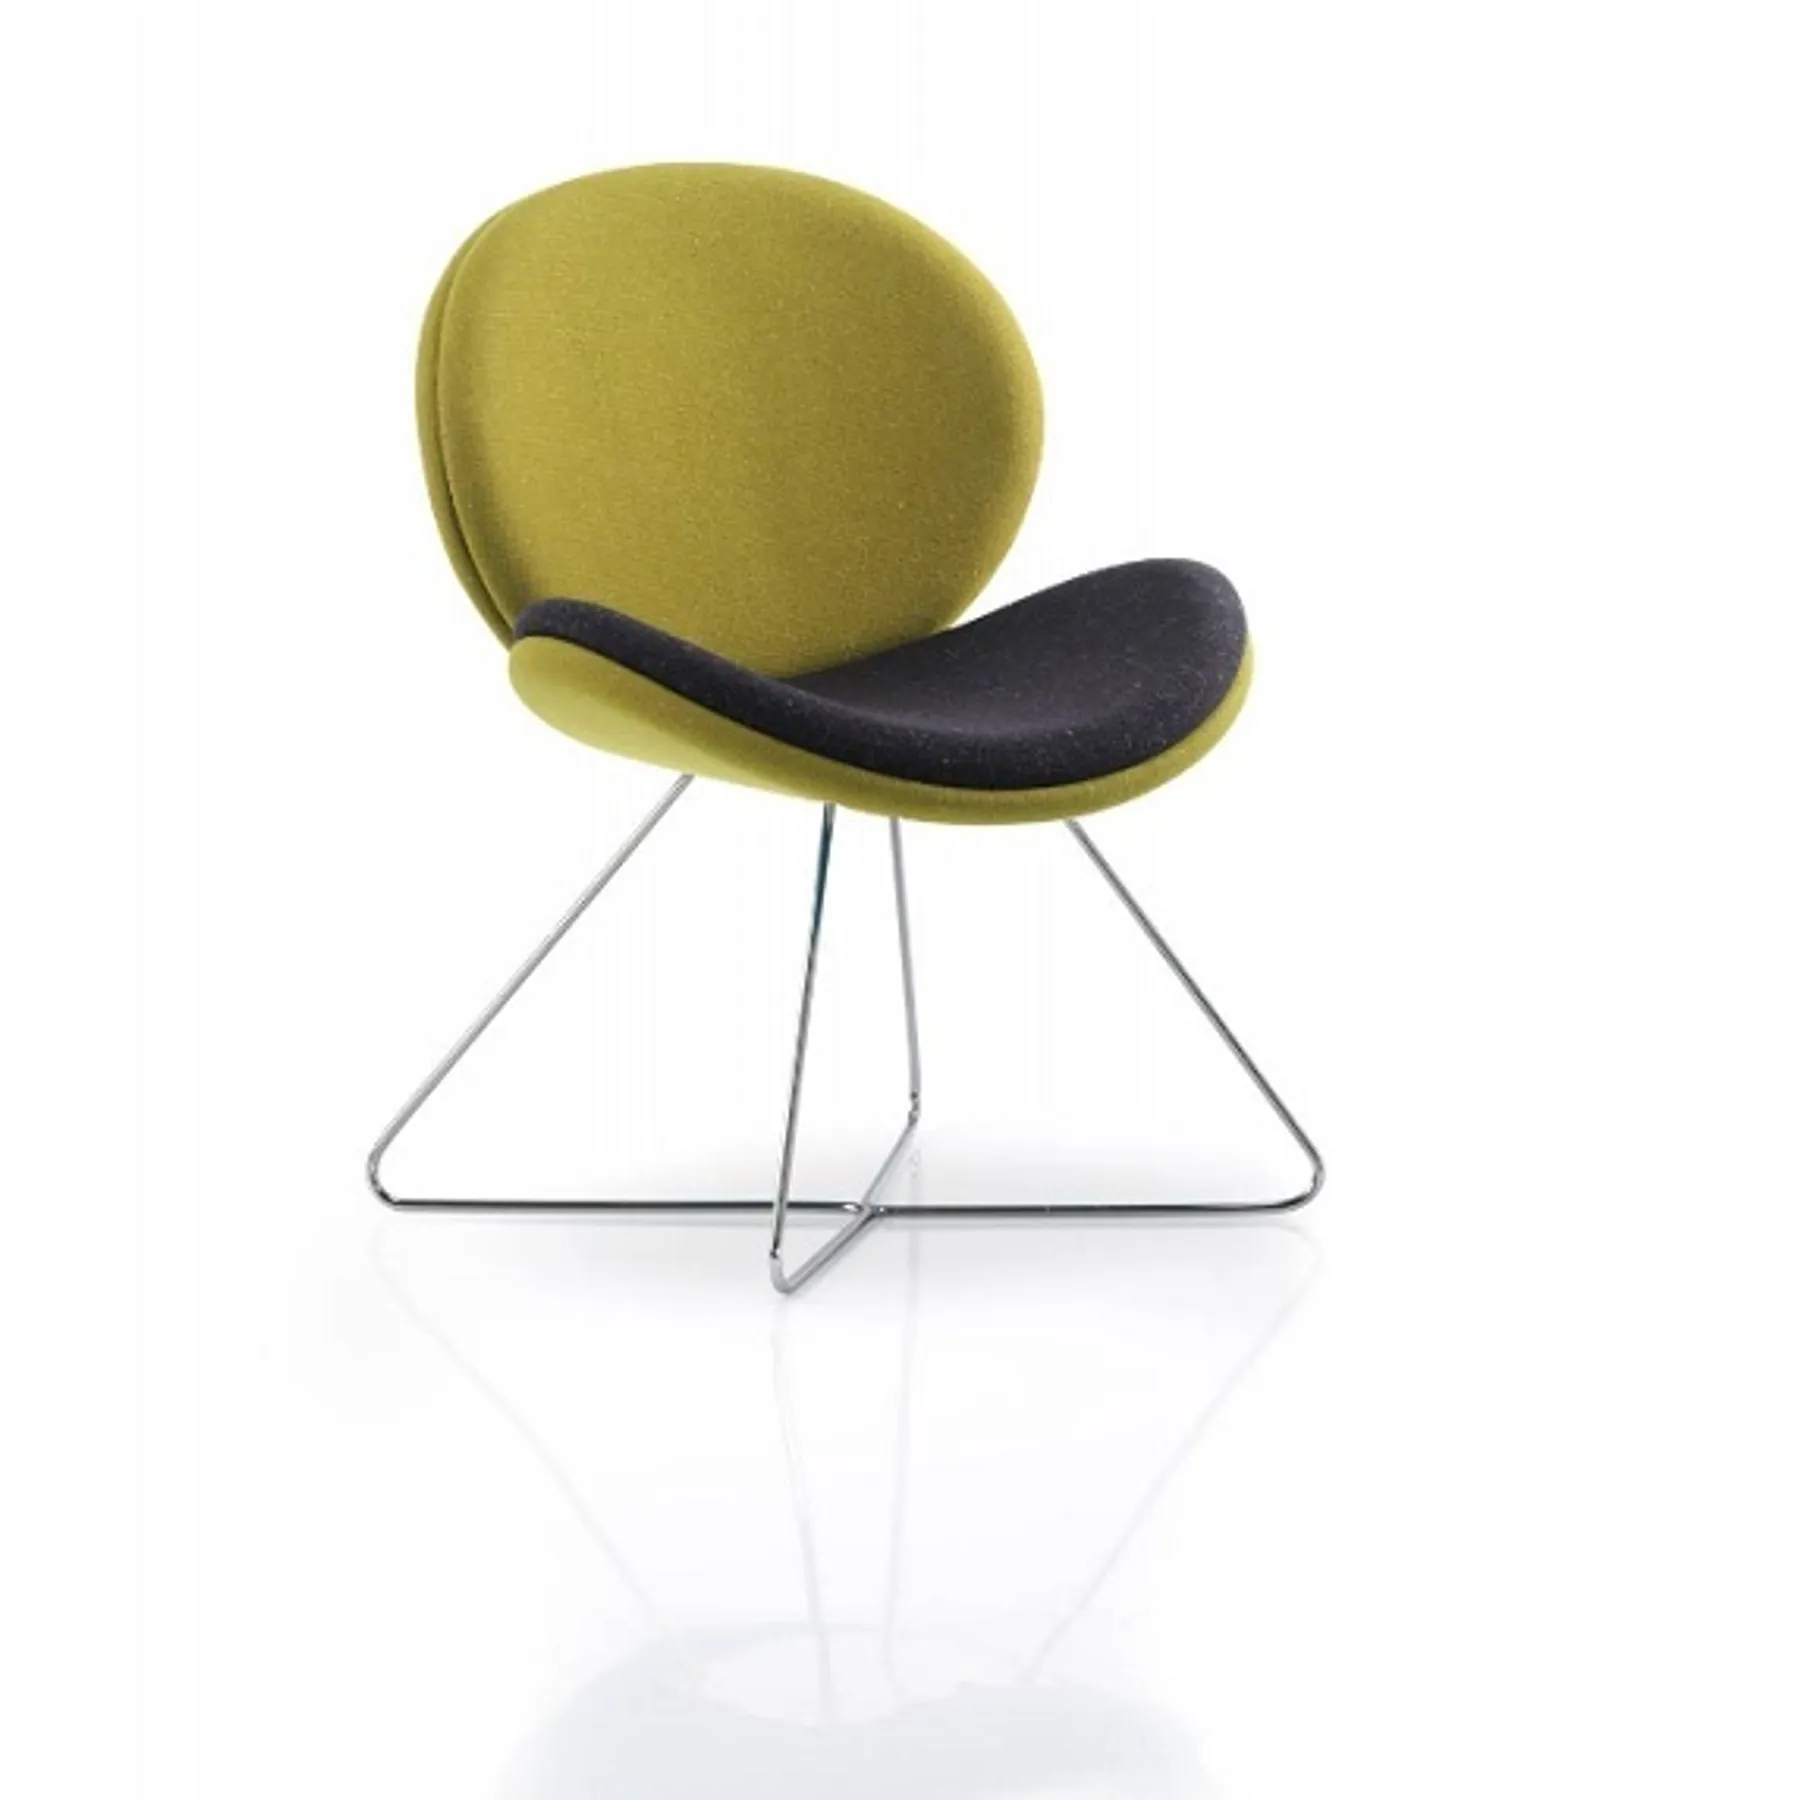 Lof Direct Giggle Chair ocee design giggle4